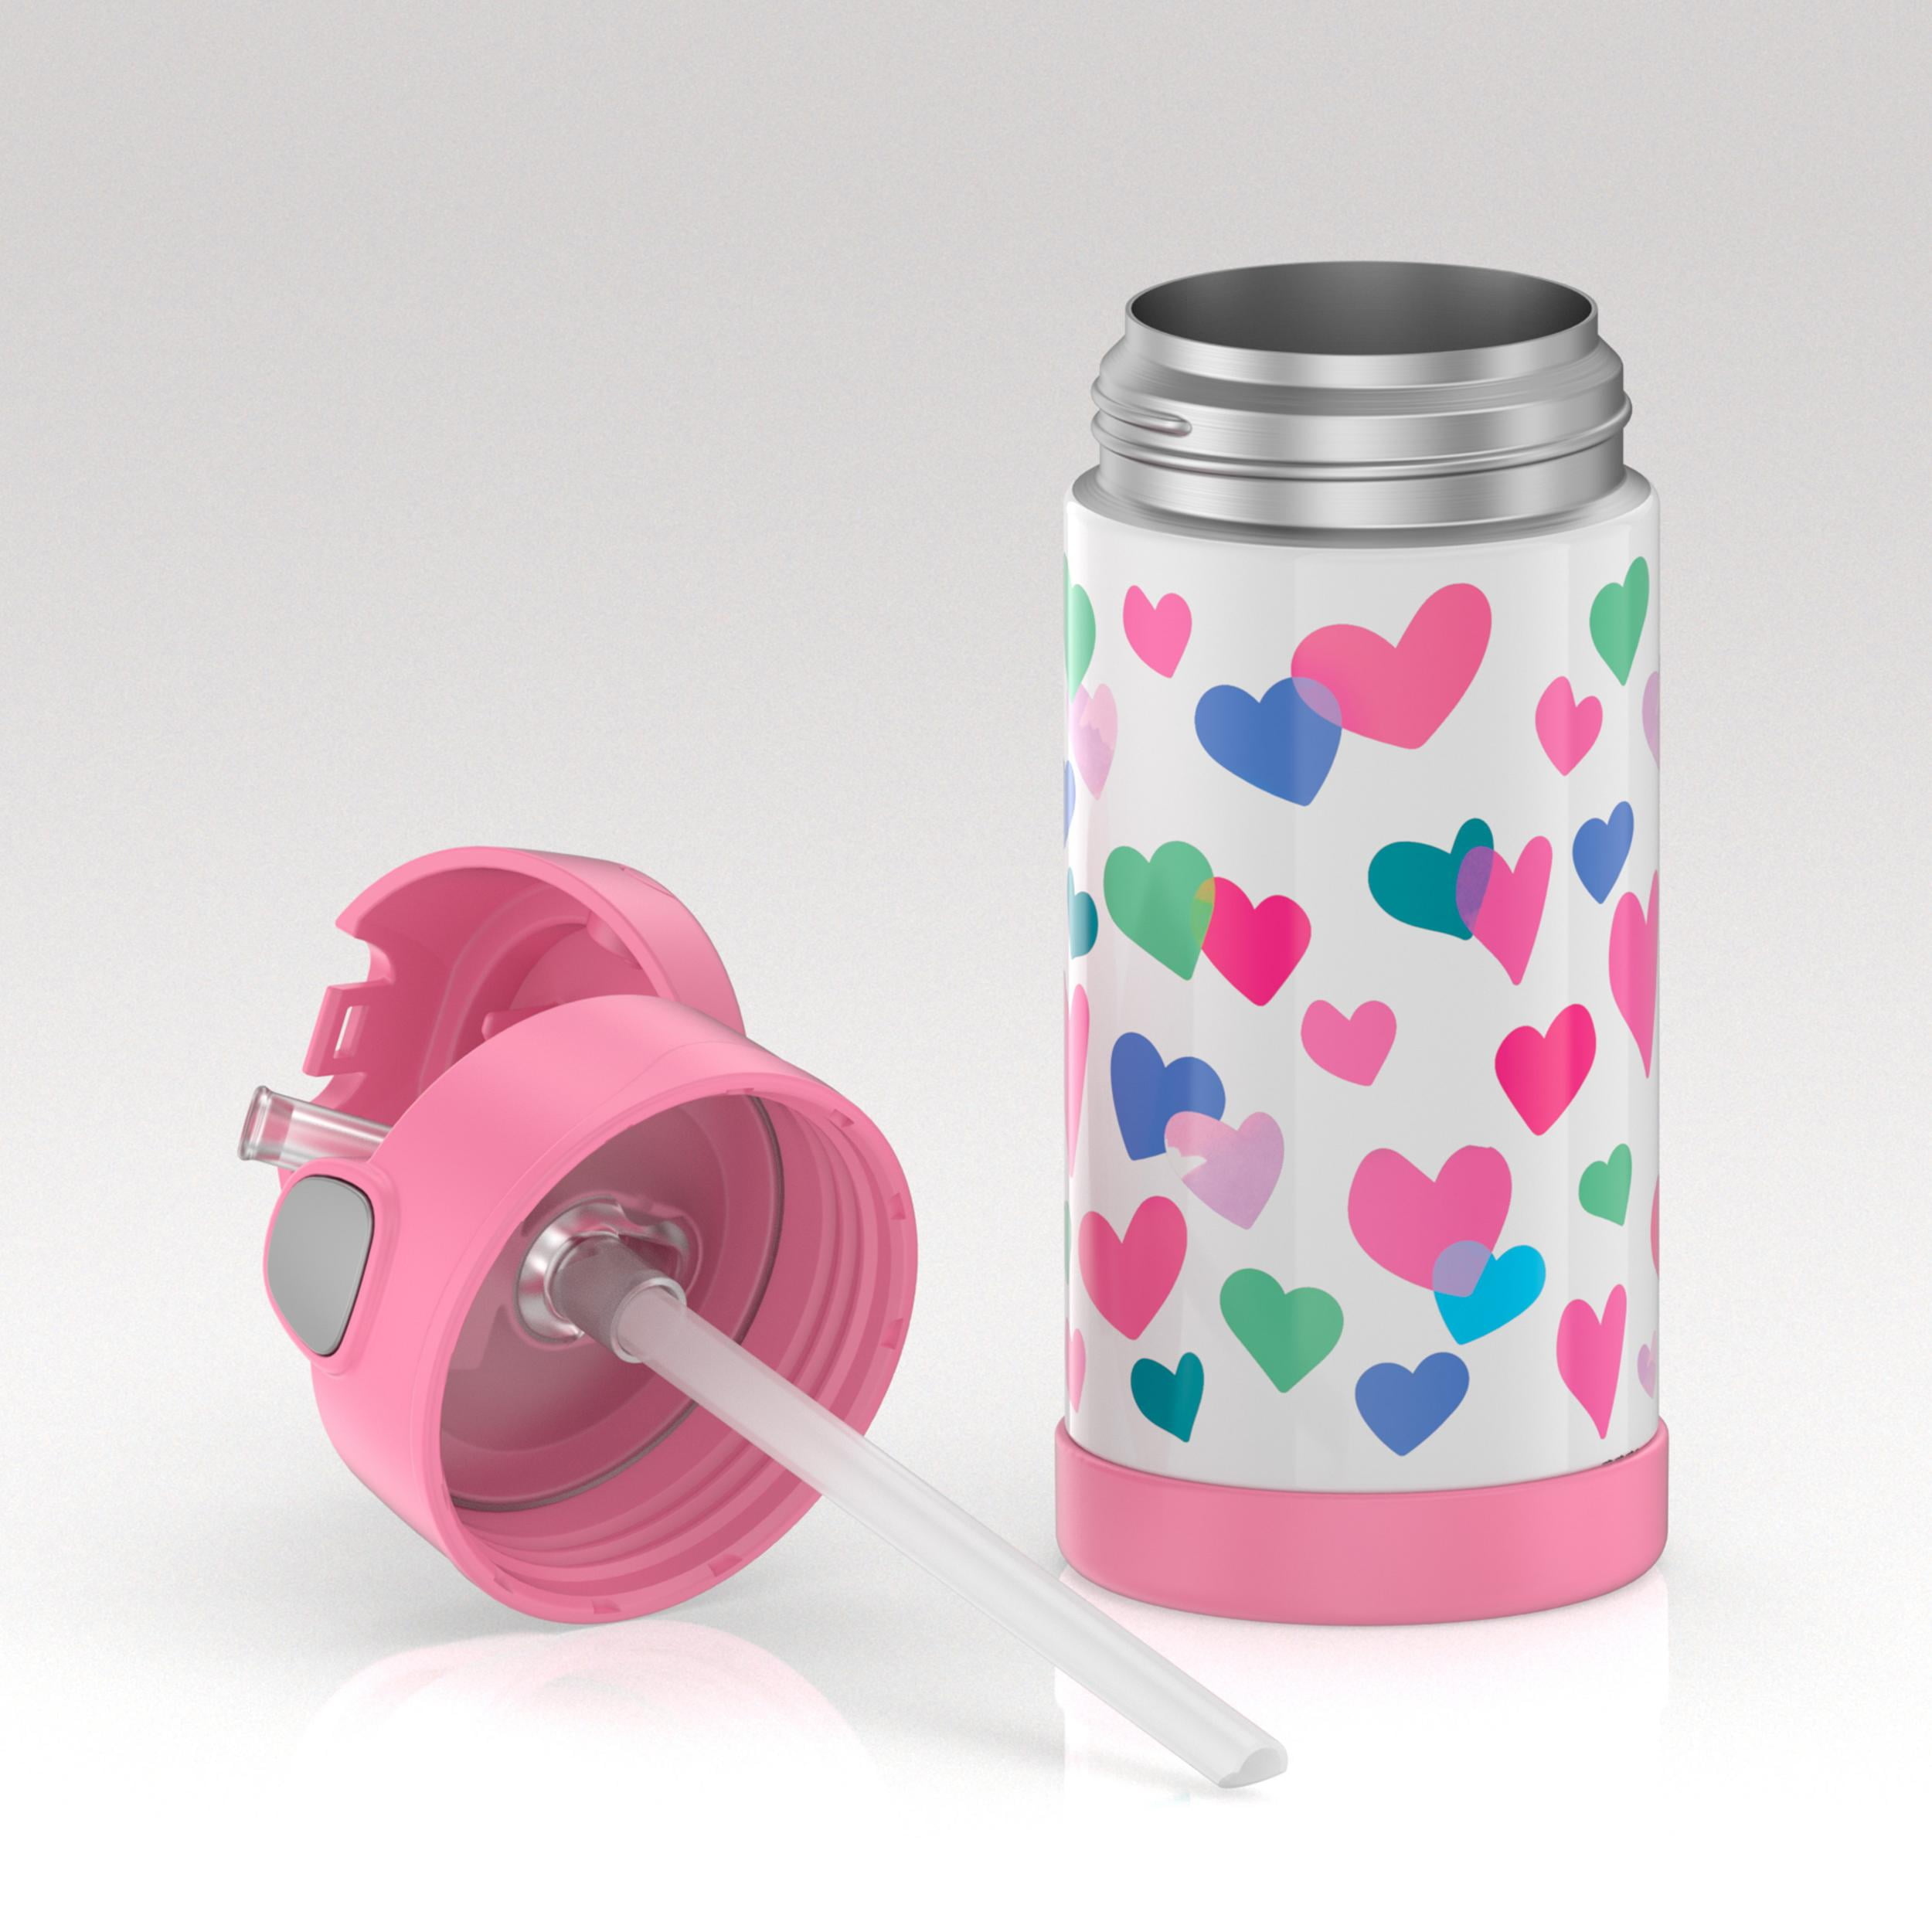 Thermos 12oz FUNtainer Water Bottle Rose Gold Pink White Glitter